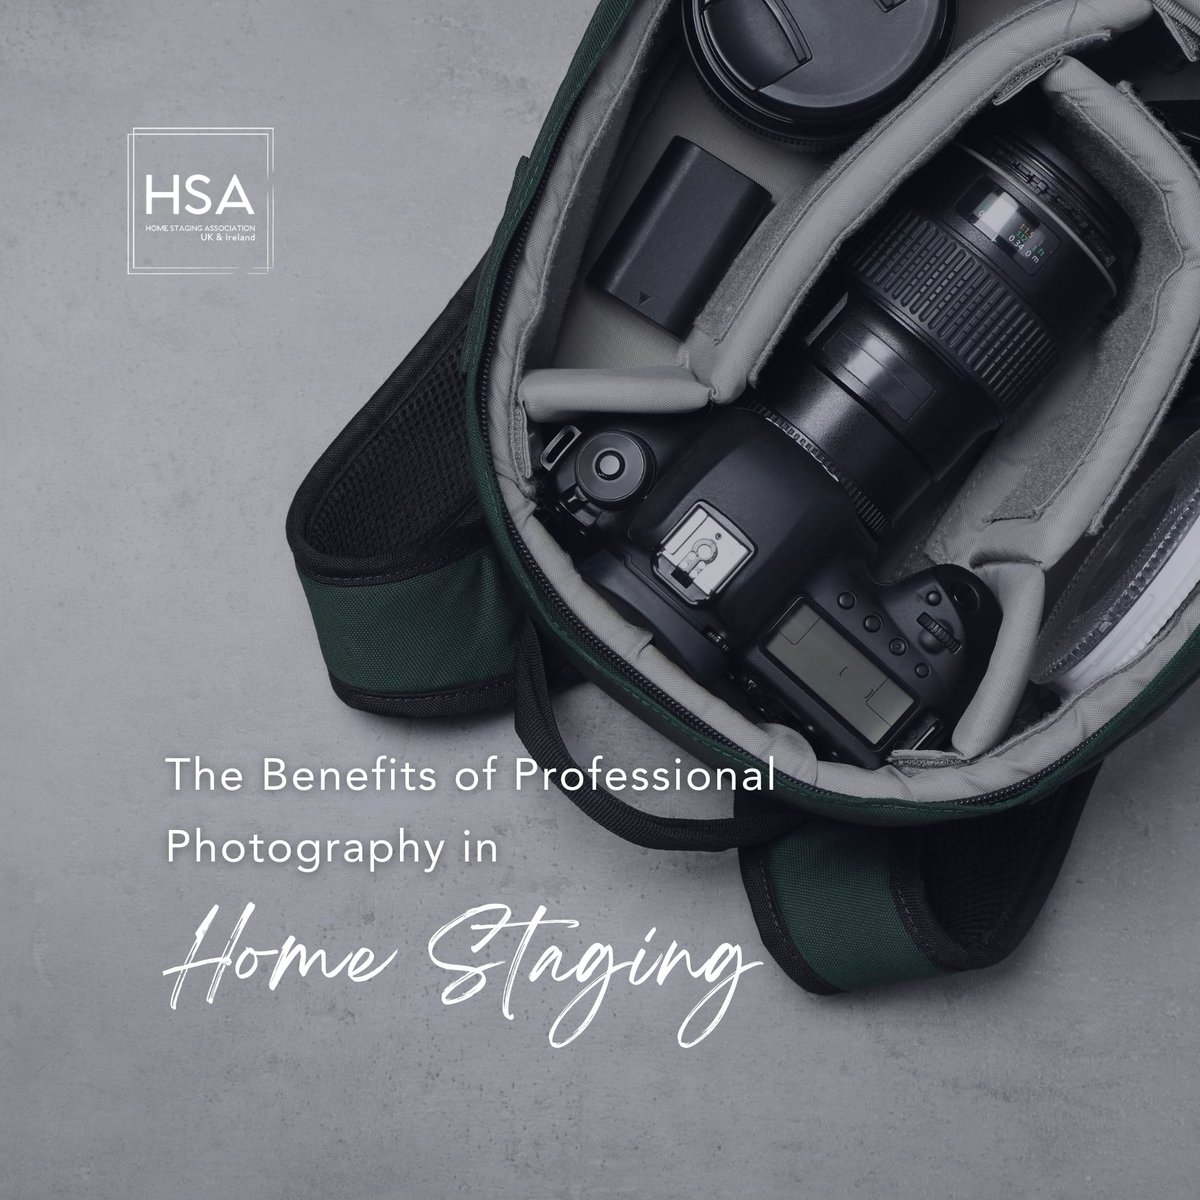 Photography plays a crucial role in showcasing the best features of a staged home. Check out our FB and IG pages for our tips featuring @inhousephotographyuk!

#homestagingtips #homestagingbusiness #InHousePhotography #professionalphotography #homestaginguk #hsauk